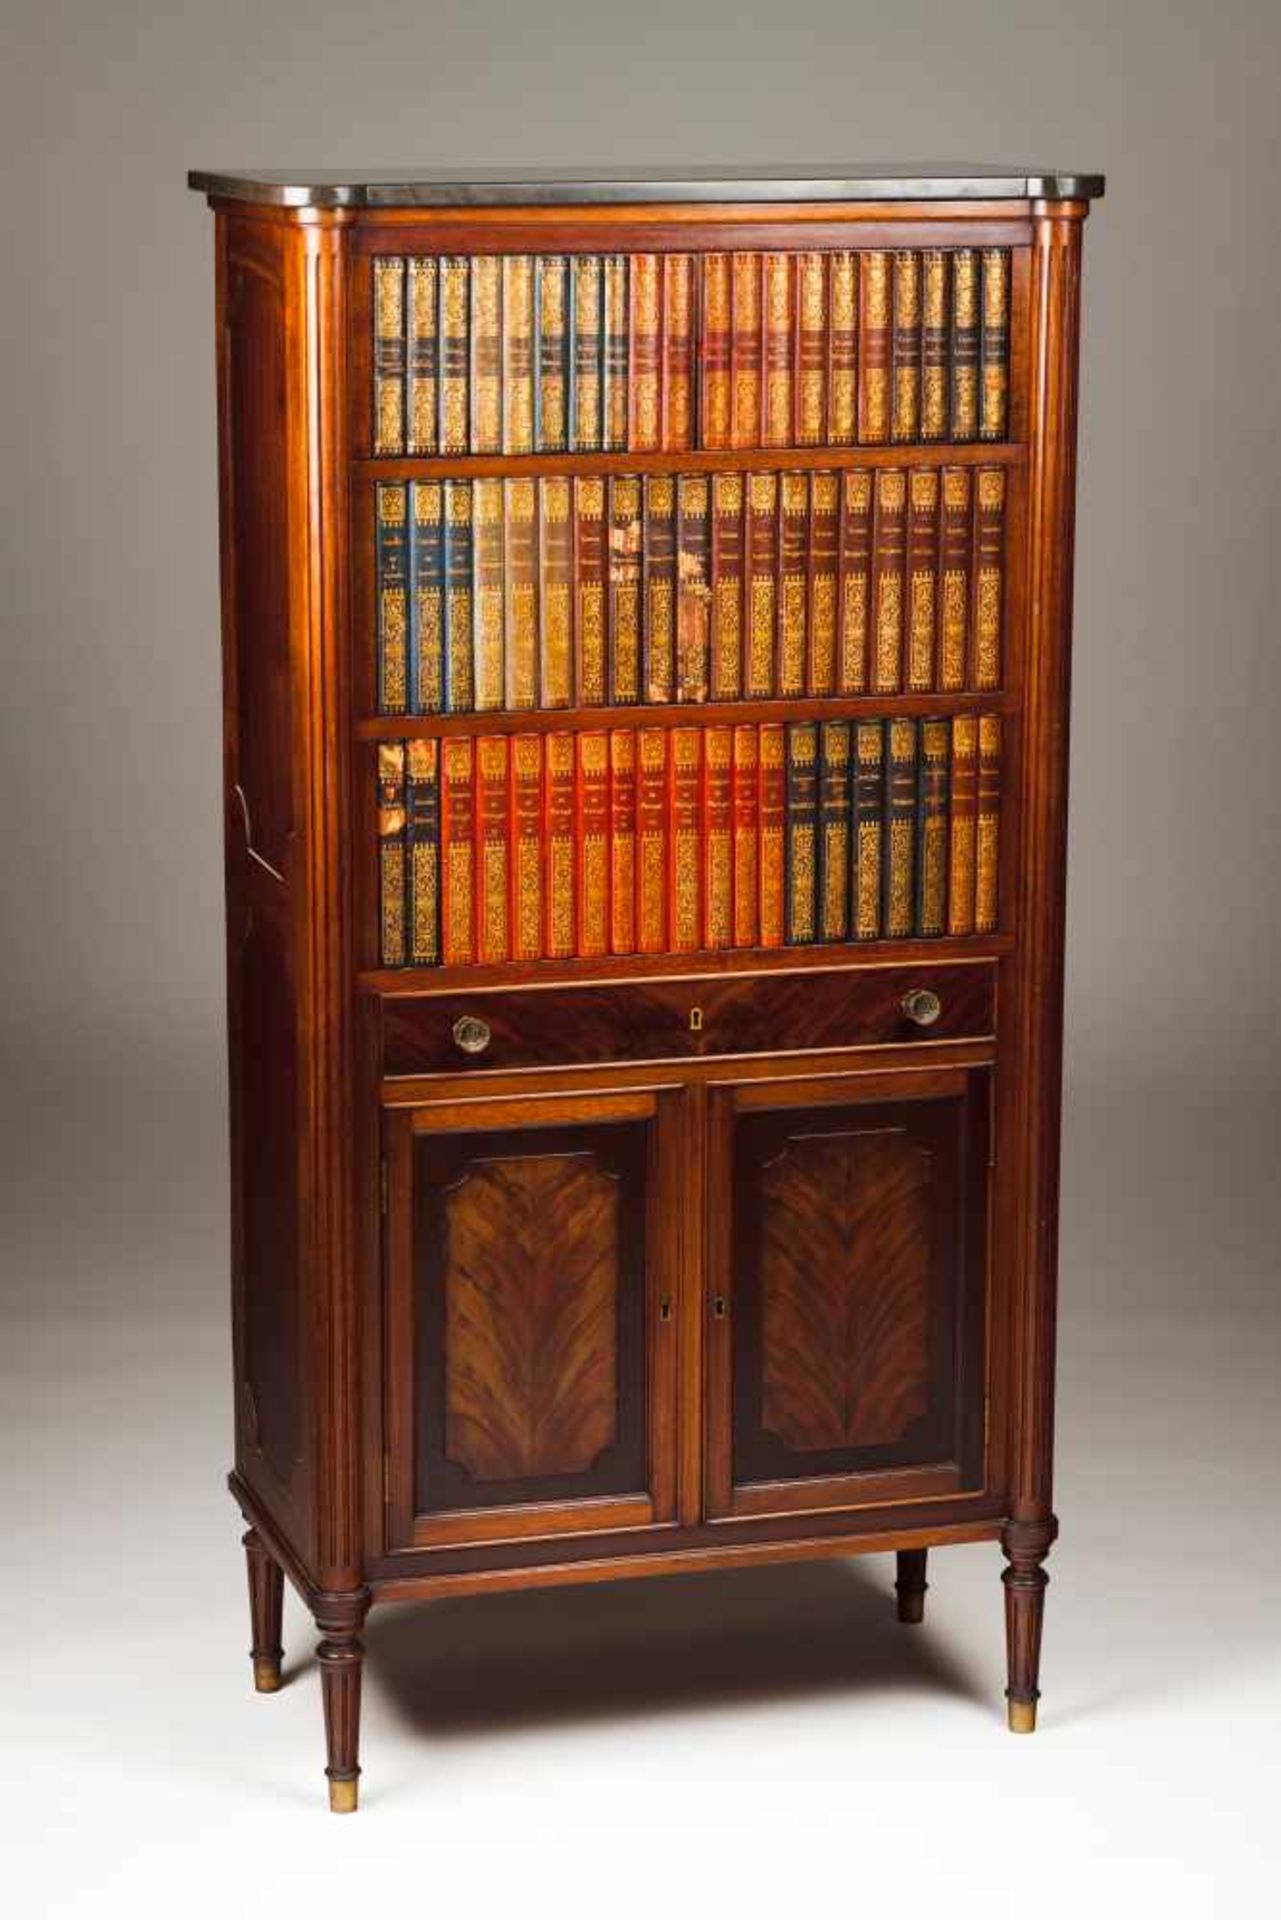 Secretaire à AbattantMahogany and other woodsDoor and front decorated with book spinesMarble